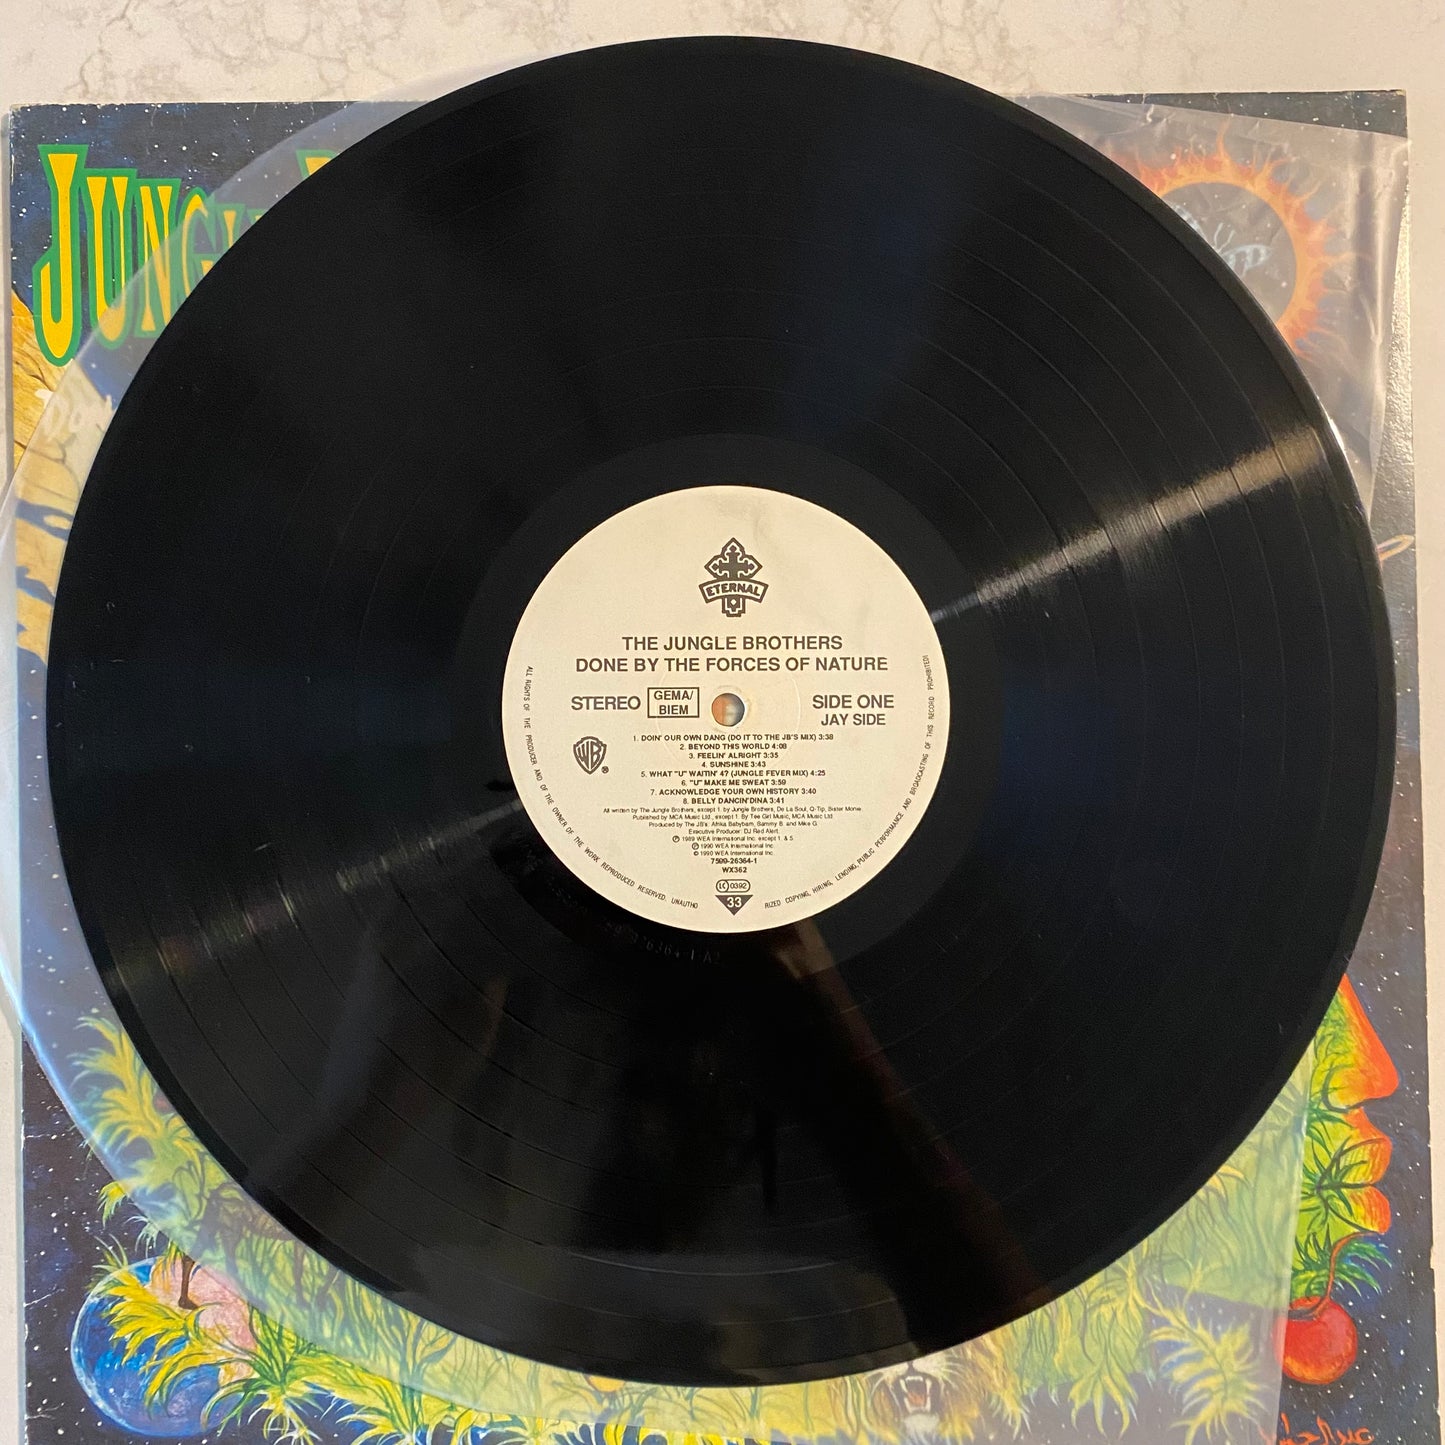 Jungle Brothers - Done By The Forces Of Nature (LP, Album)